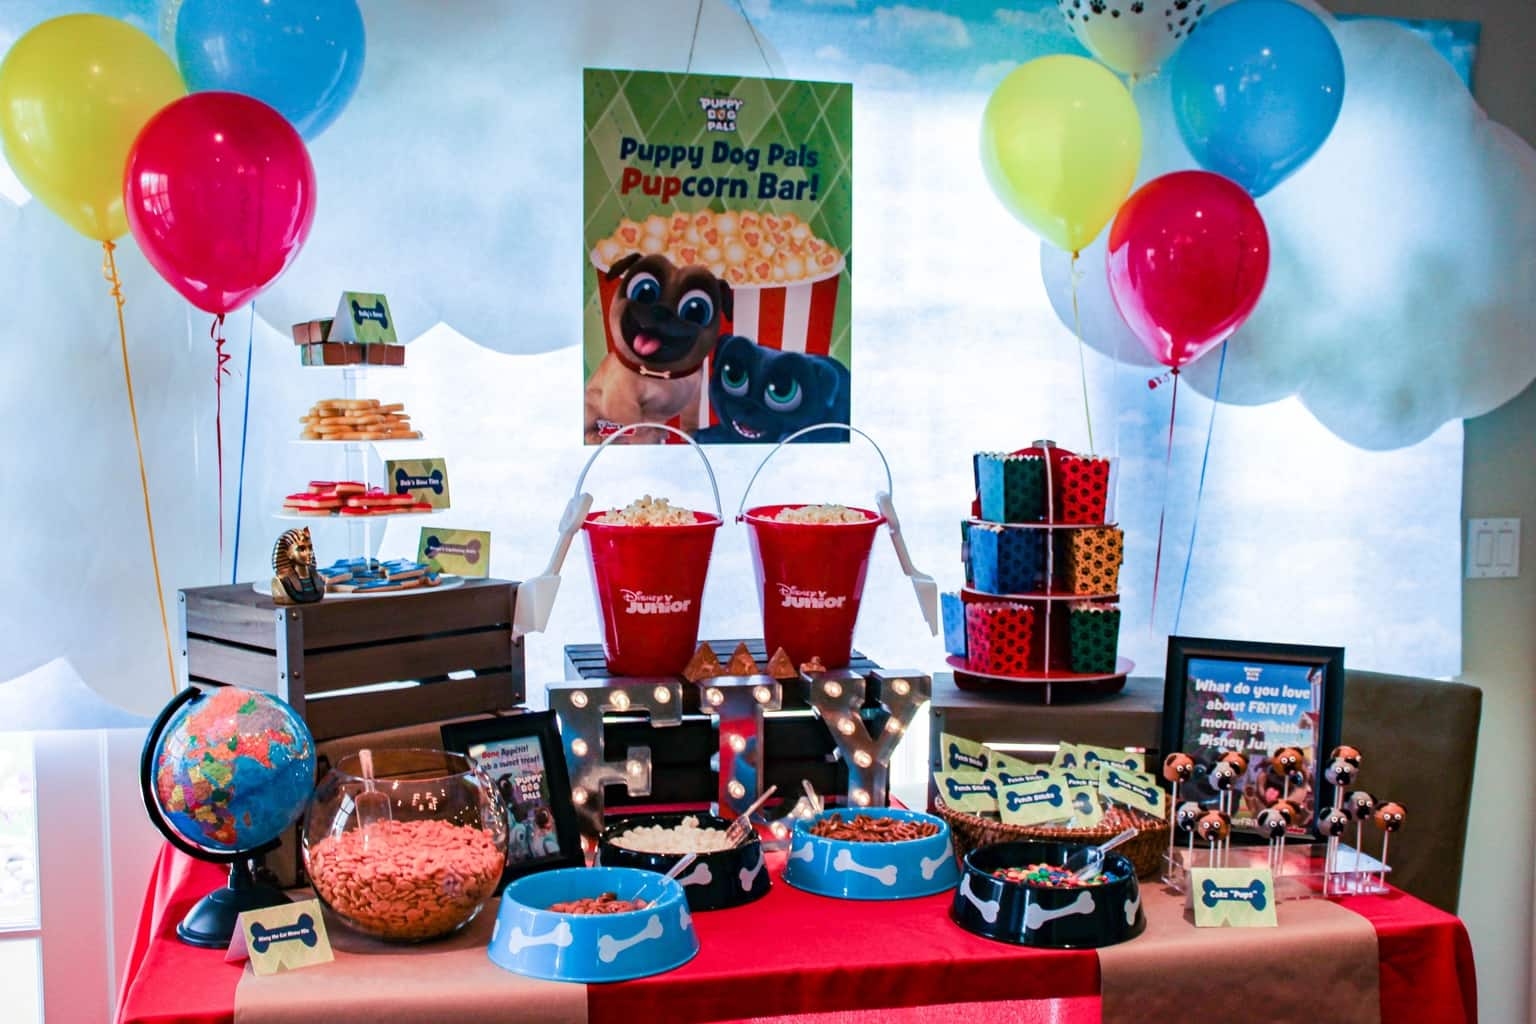 Are you planning a Disney Junior Puppy Dog Pals birthday party? Then check out out this list of of 10+ Unique Puppy Dog Pals Birthday Party Ideas for any occasion.